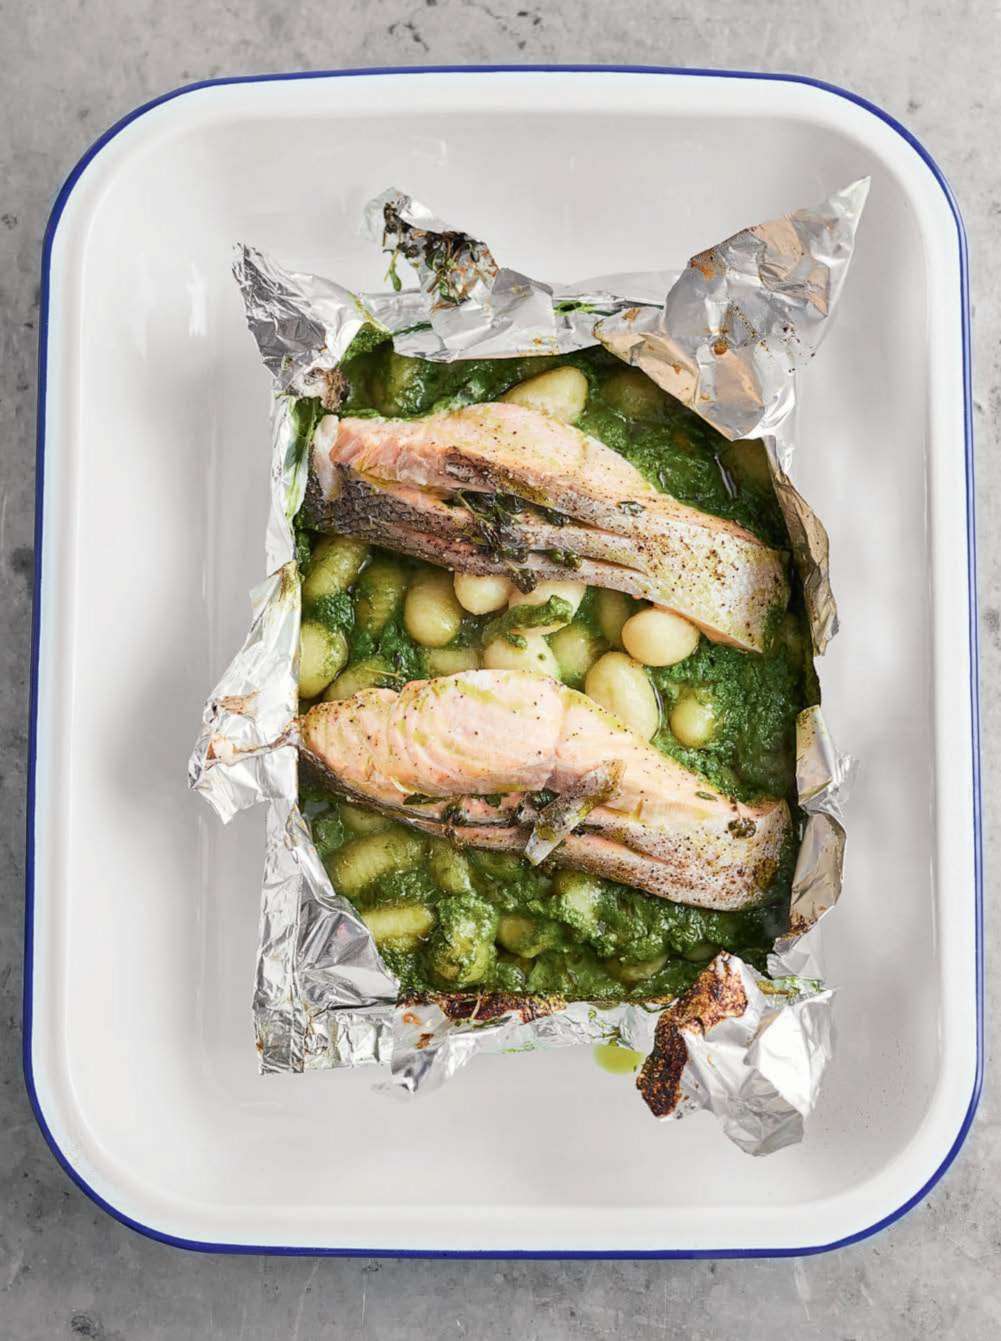 PHOTO: Salmon baked in foil with spinach and gnocchi.